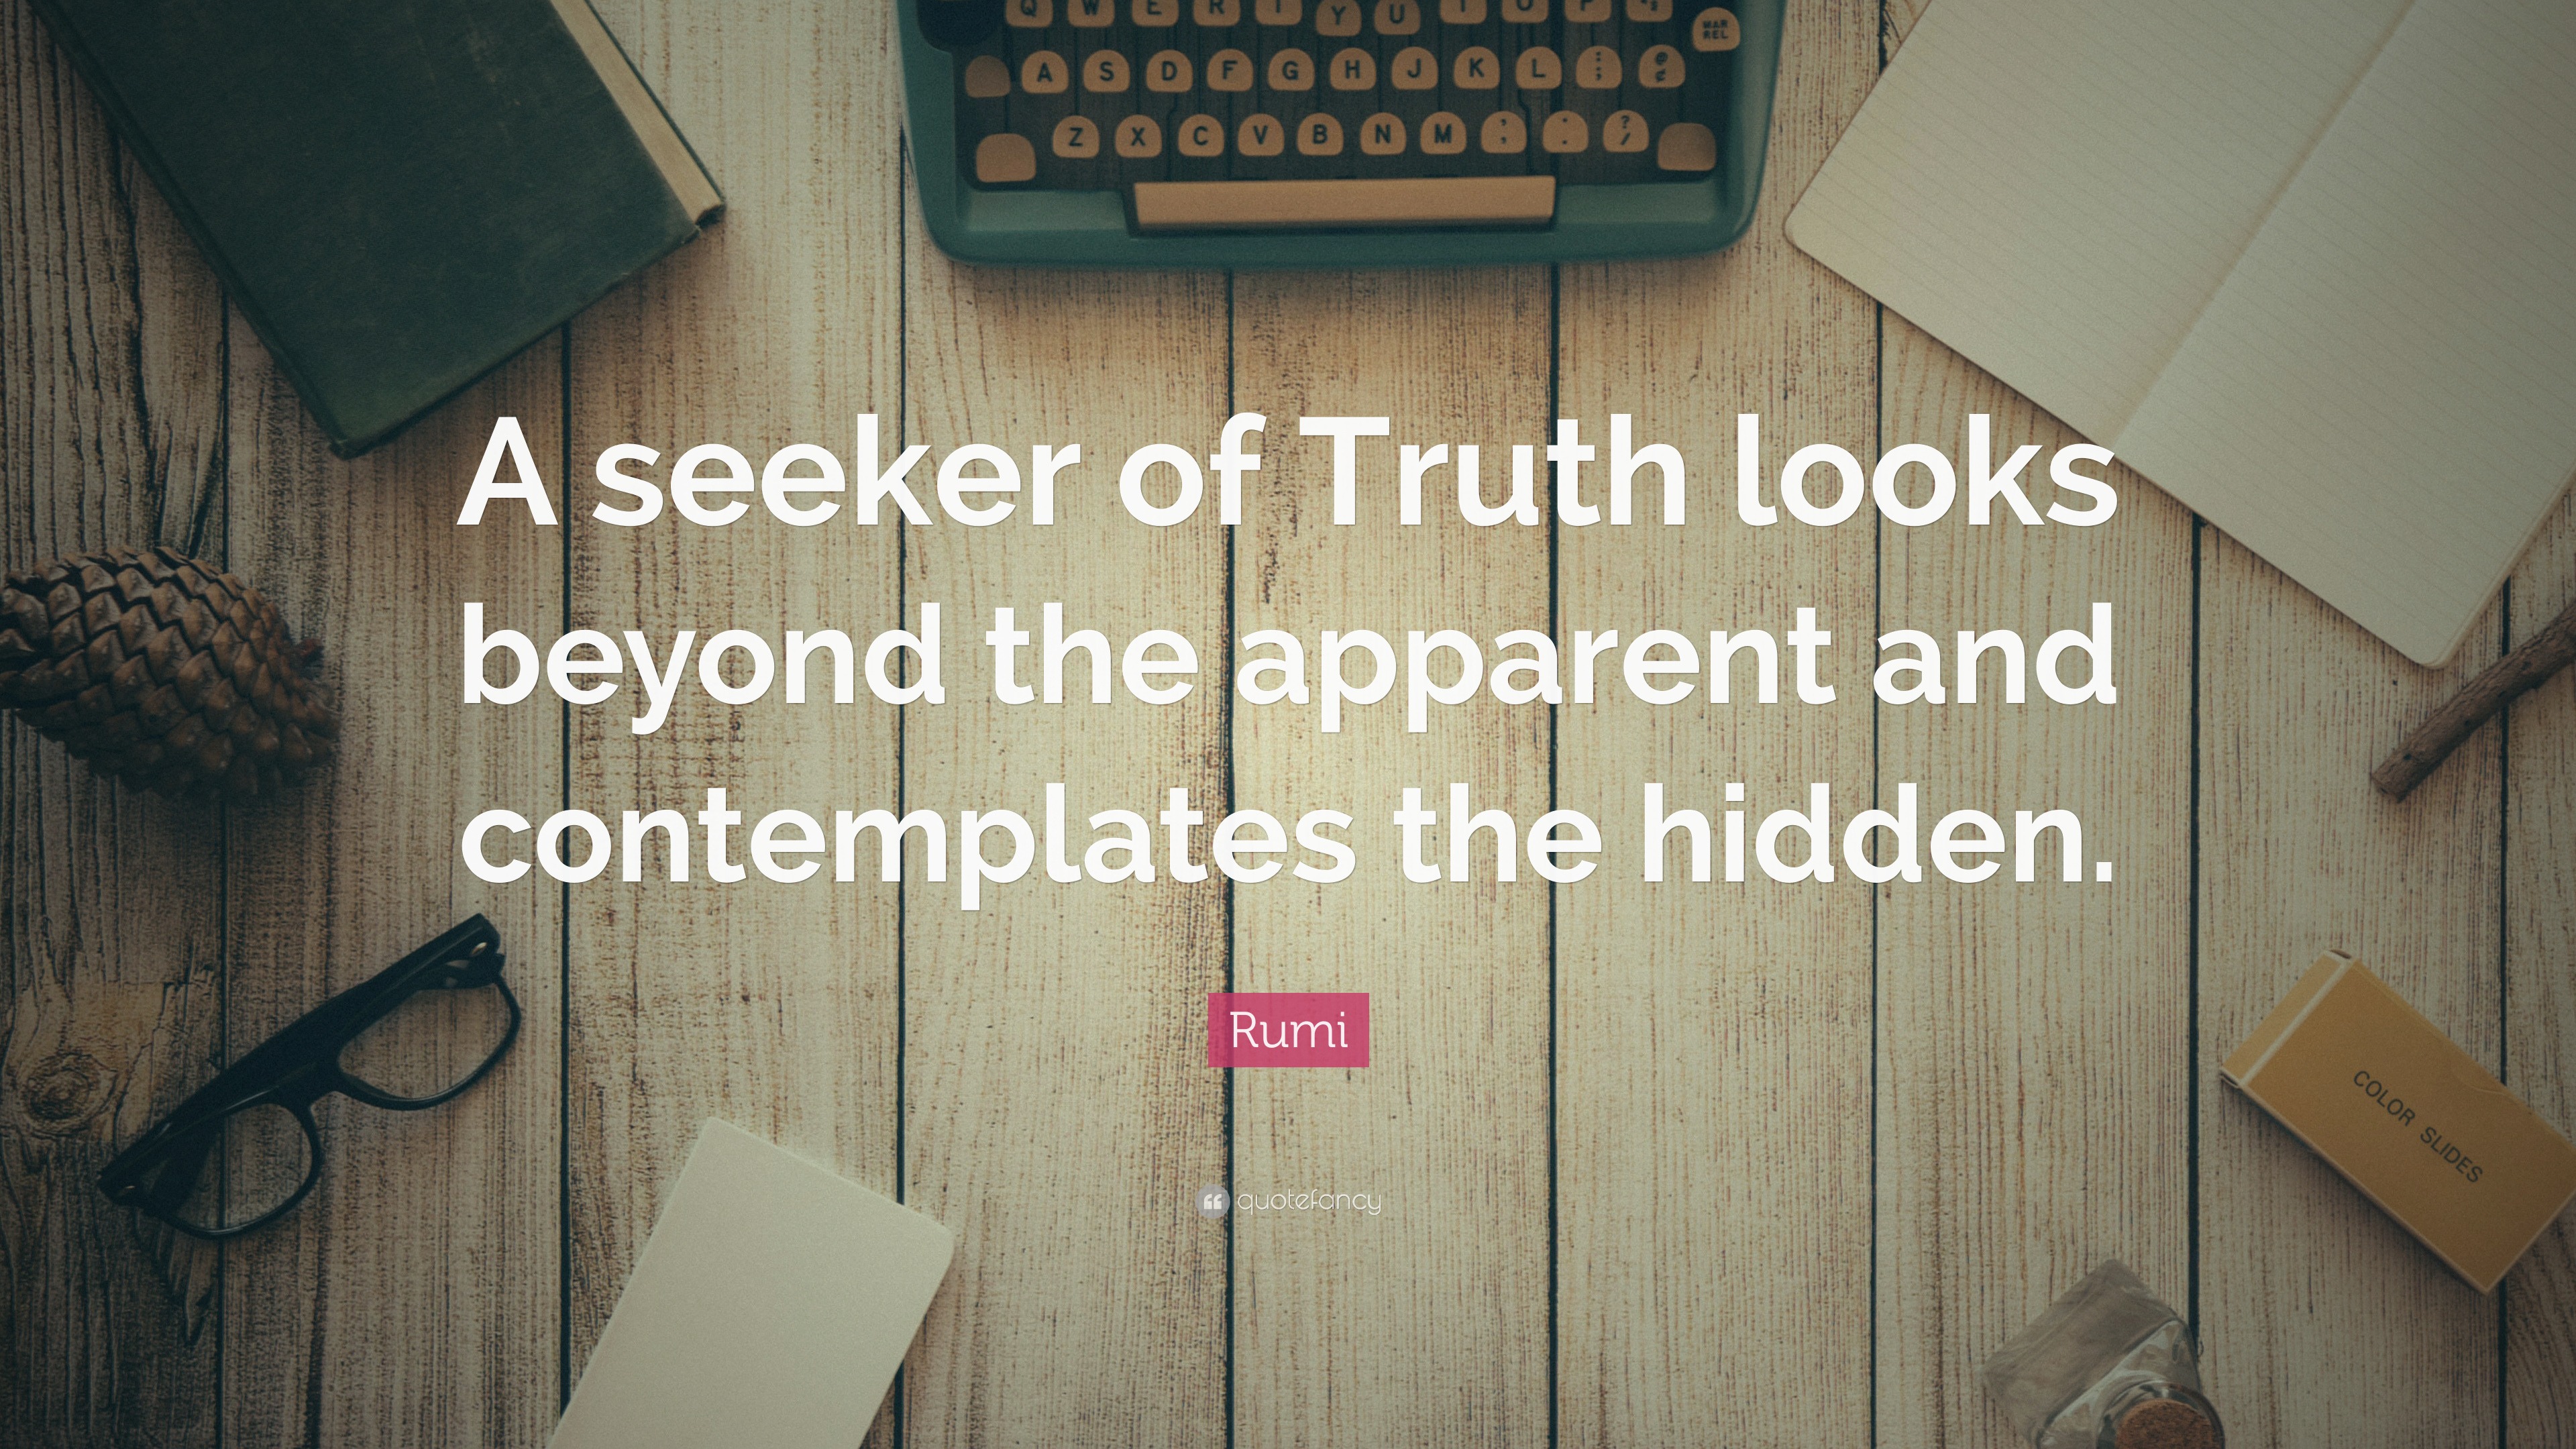 Rumi Quote “A seeker of Truth looks beyond the apparent and contemplates the hidden